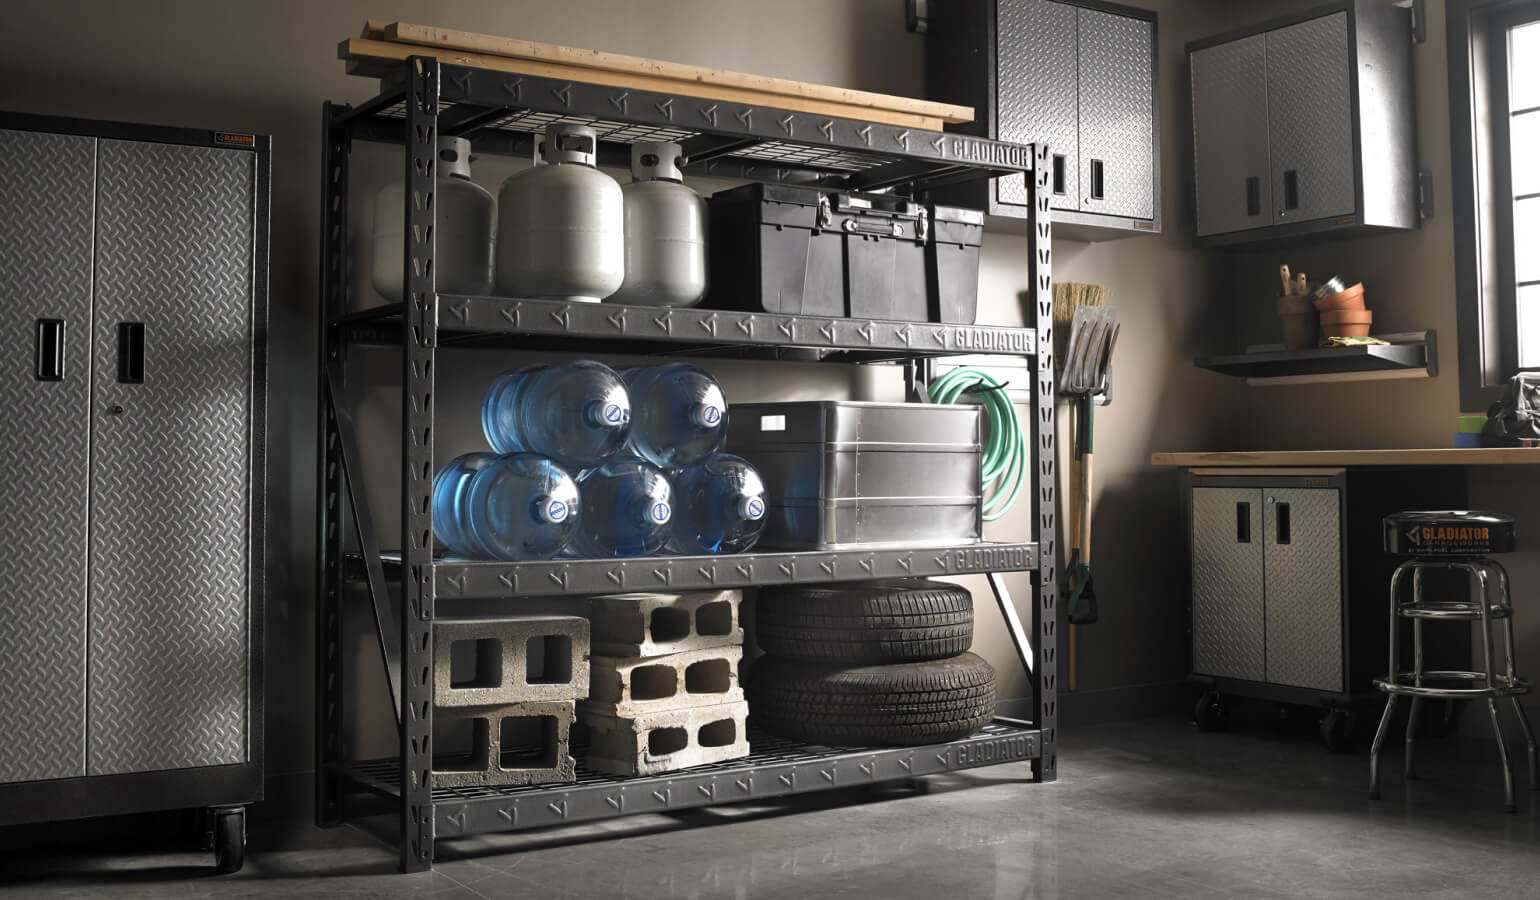 A Gladiator brand shelving unit stacked with concrete, water jugs, propane tanks and other heavy objects.